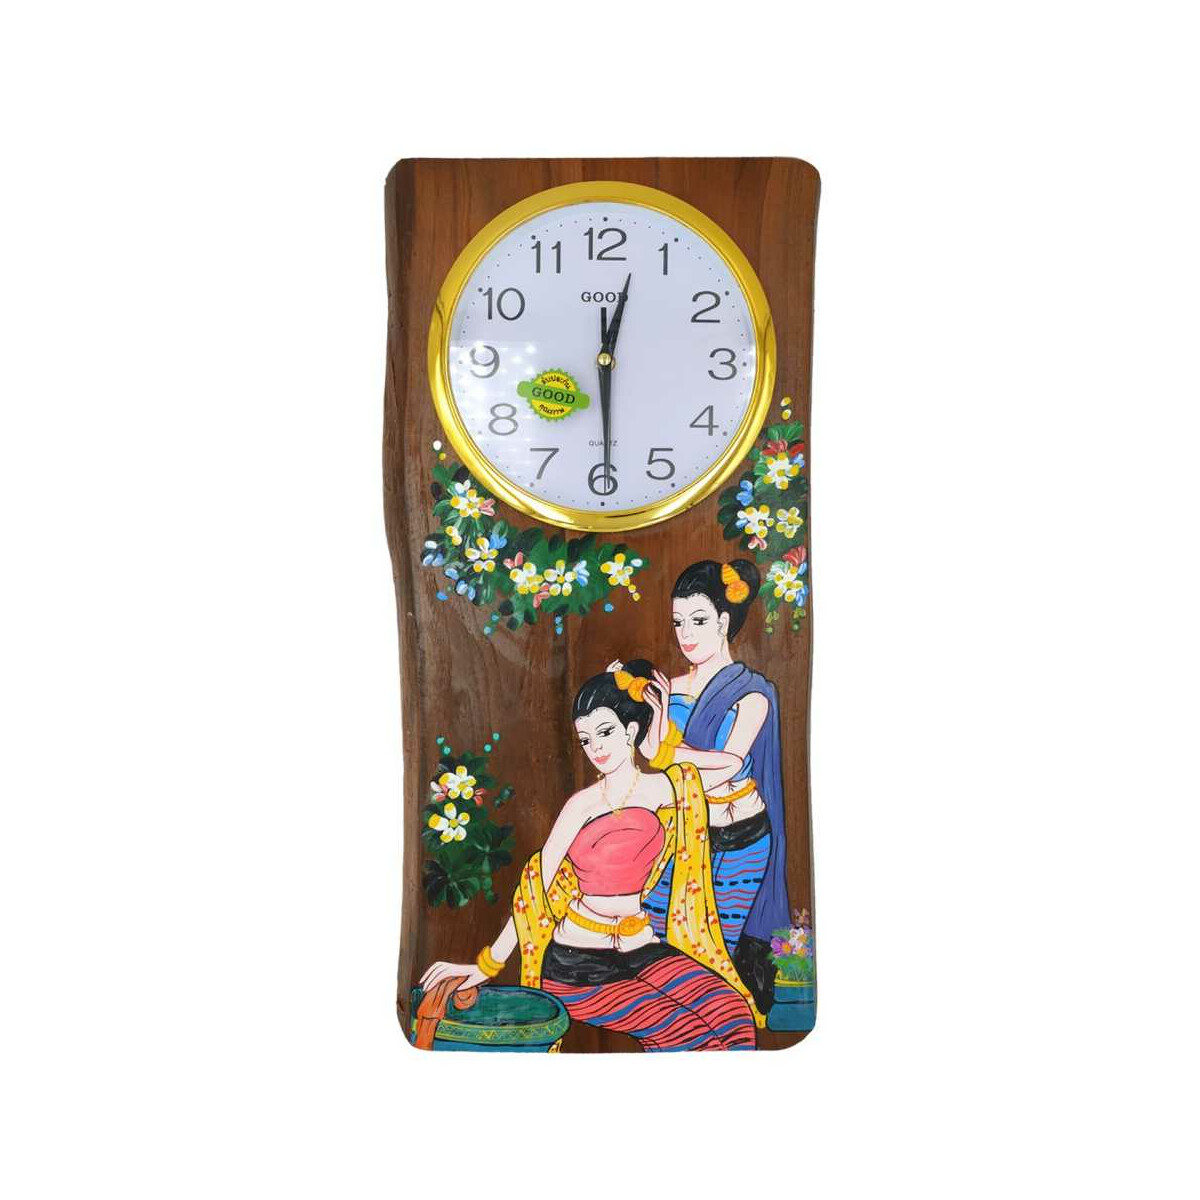 Teak Wall Clock with Thai Painting